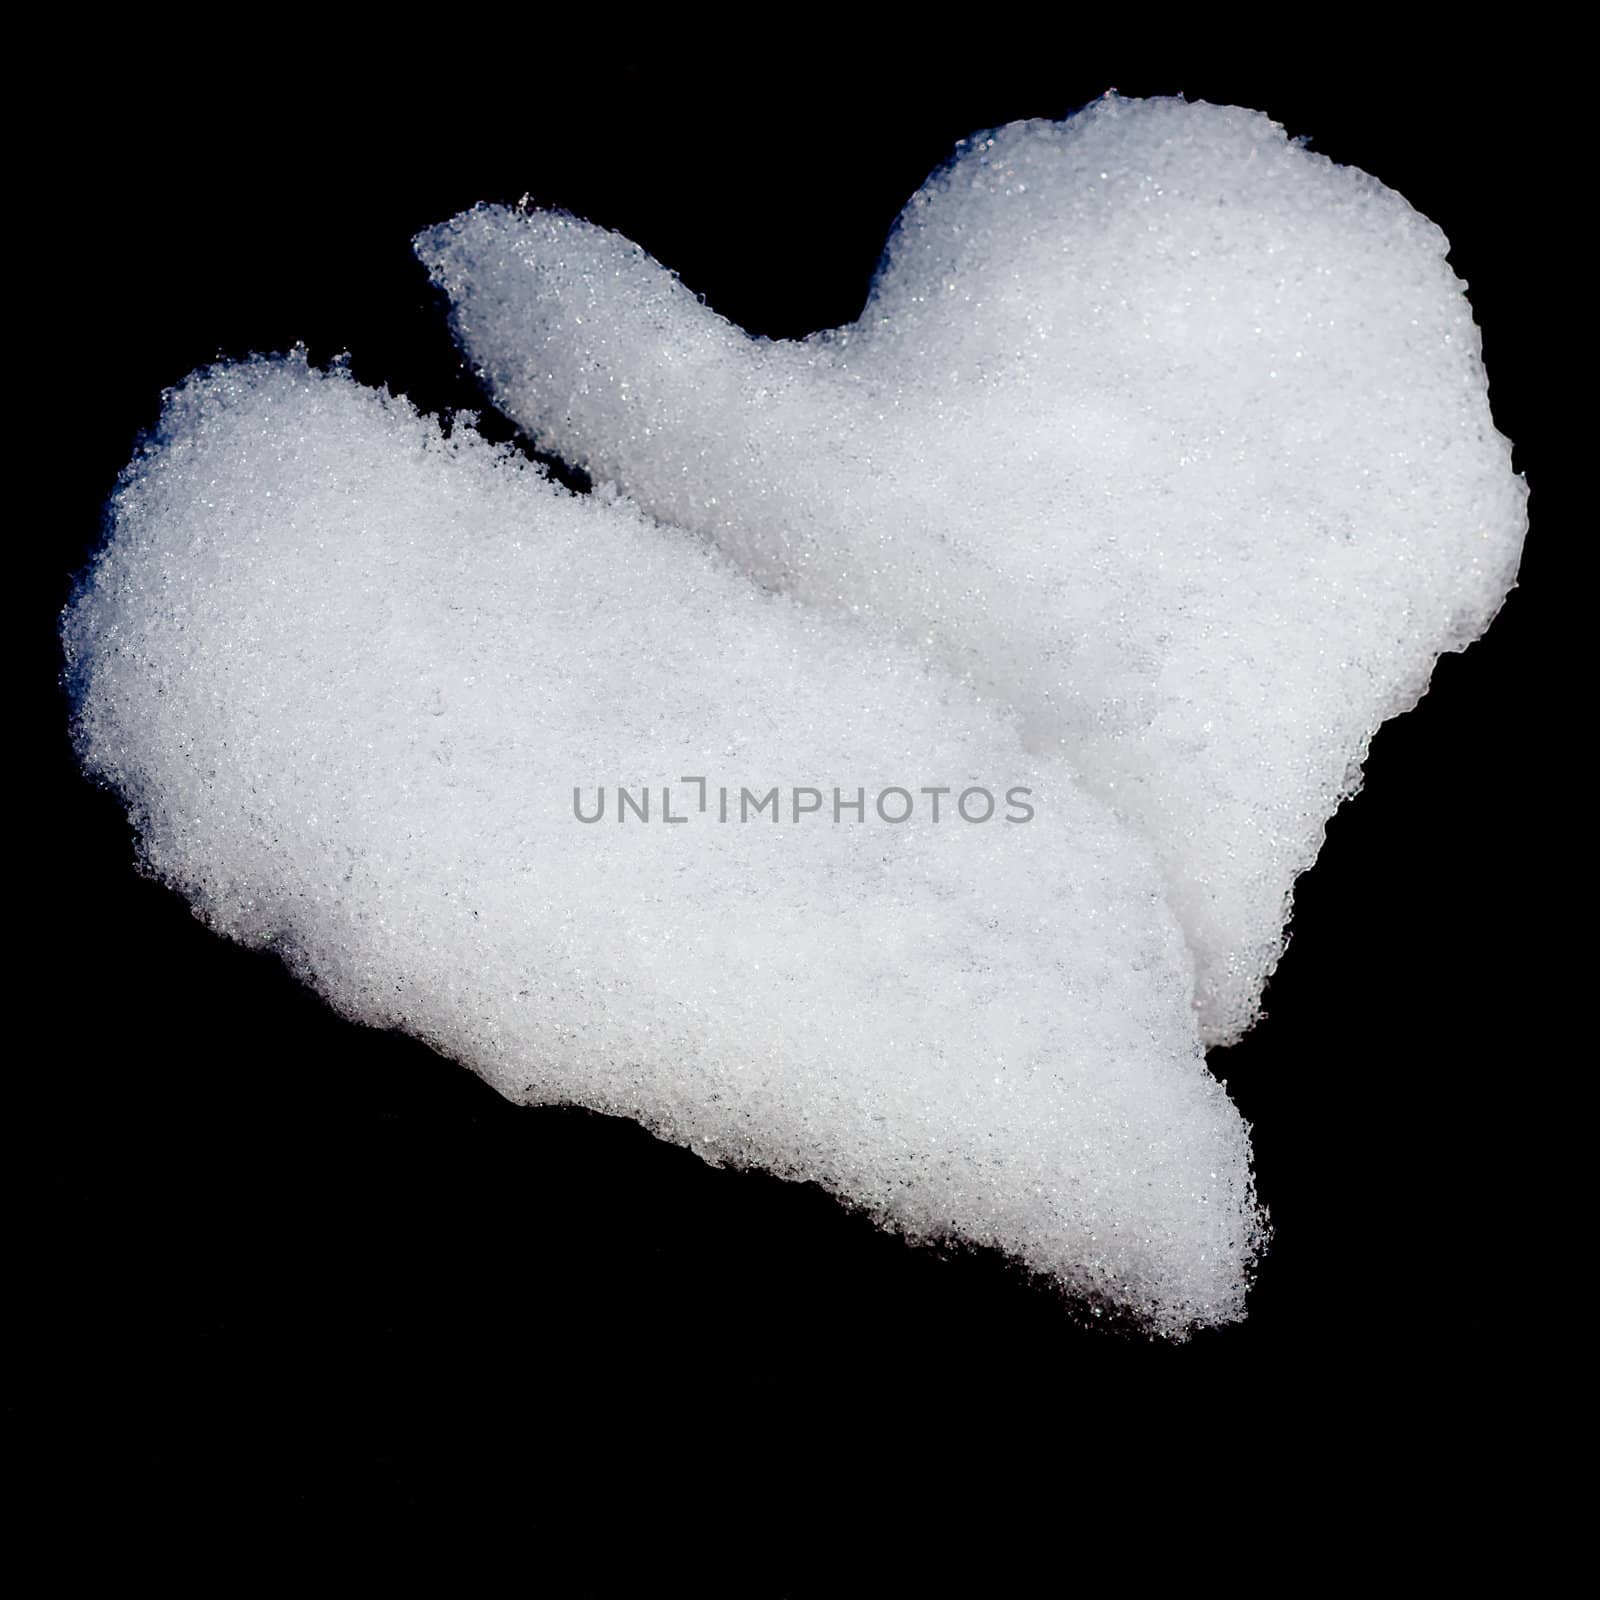 Broken heart formed from snow isolated on black background.